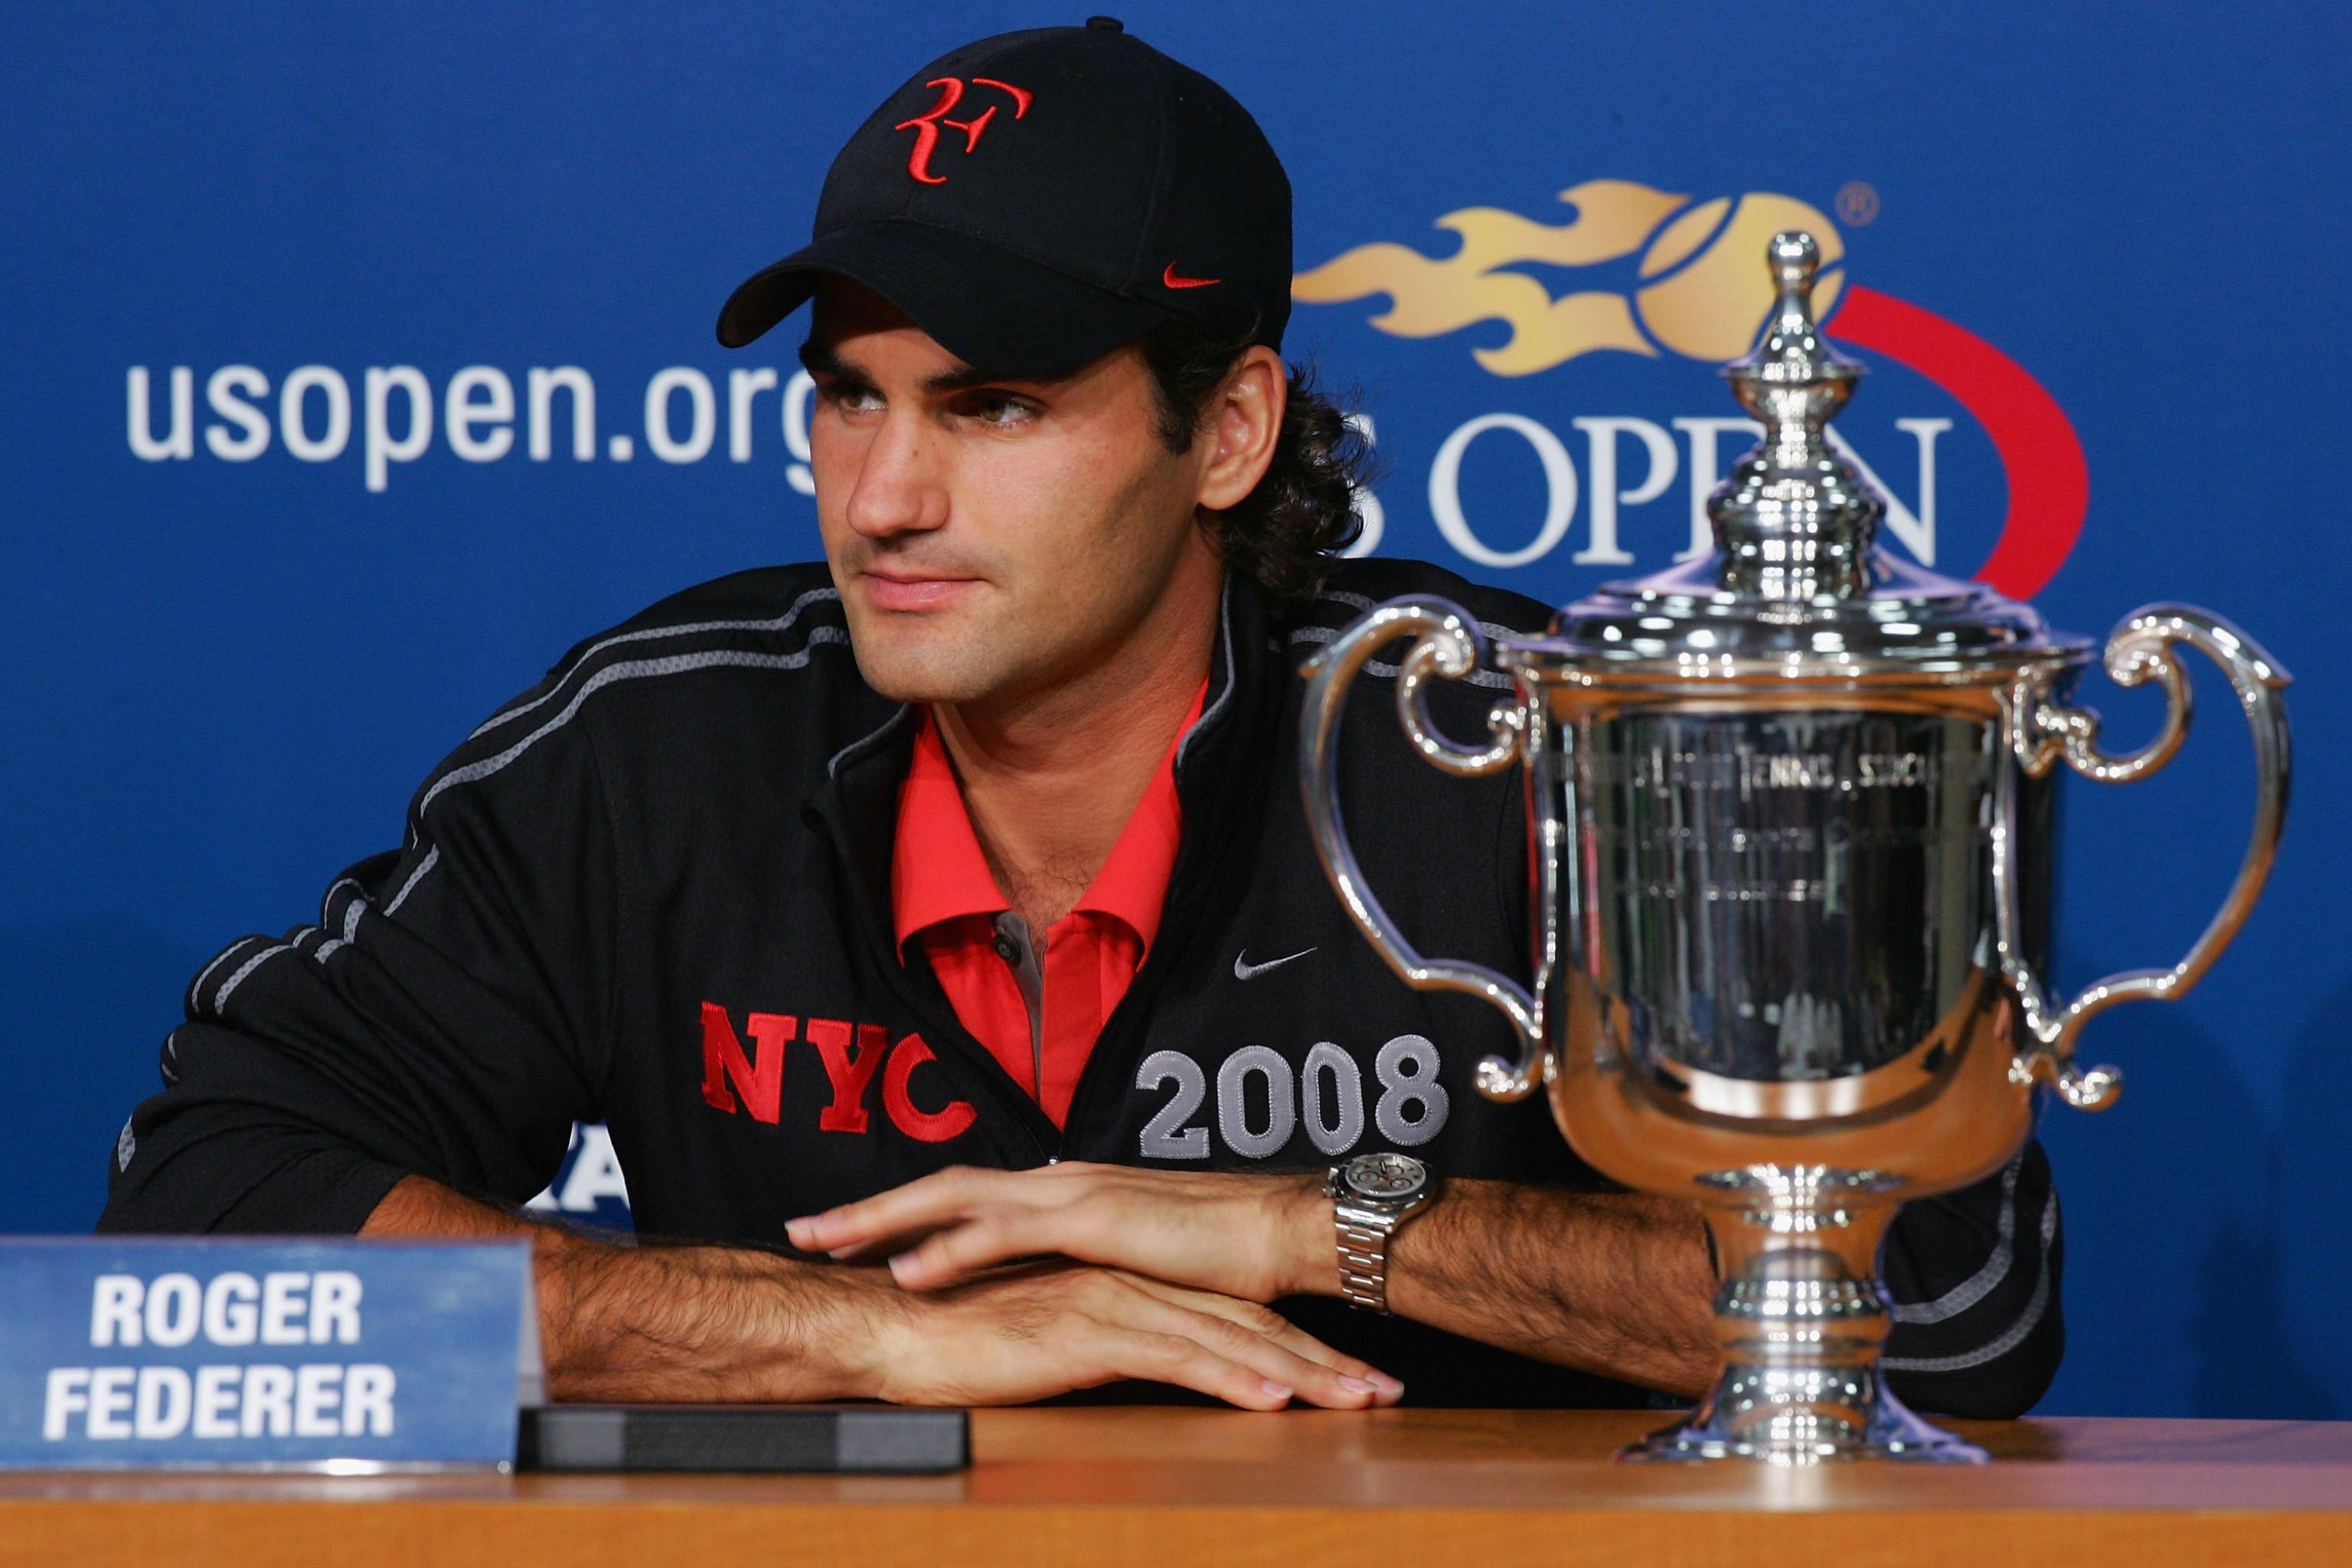 Roger Federer's 5 Consecutive US Open Titles Is an Unbreakable Record | Bleacher Report | Latest News, Videos and Highlights